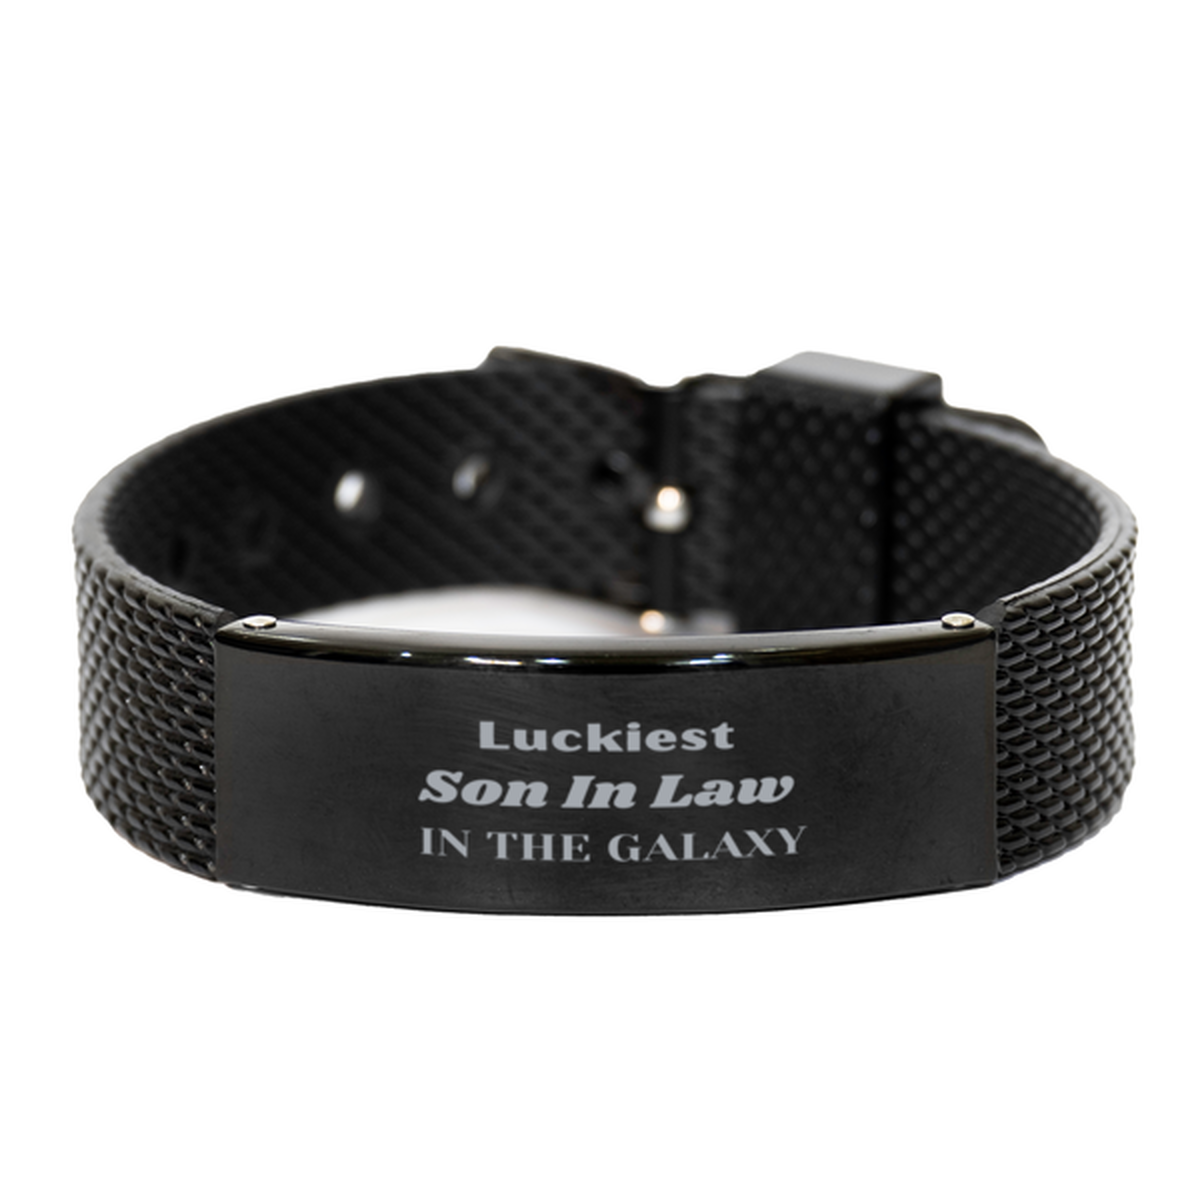 Luckiest Son In Law in the Galaxy, To My Son In Law Engraved Gifts, Christmas Son In Law Black Shark Mesh Bracelet Gifts, X-mas Birthday Unique Gifts For Son In Law Men Women